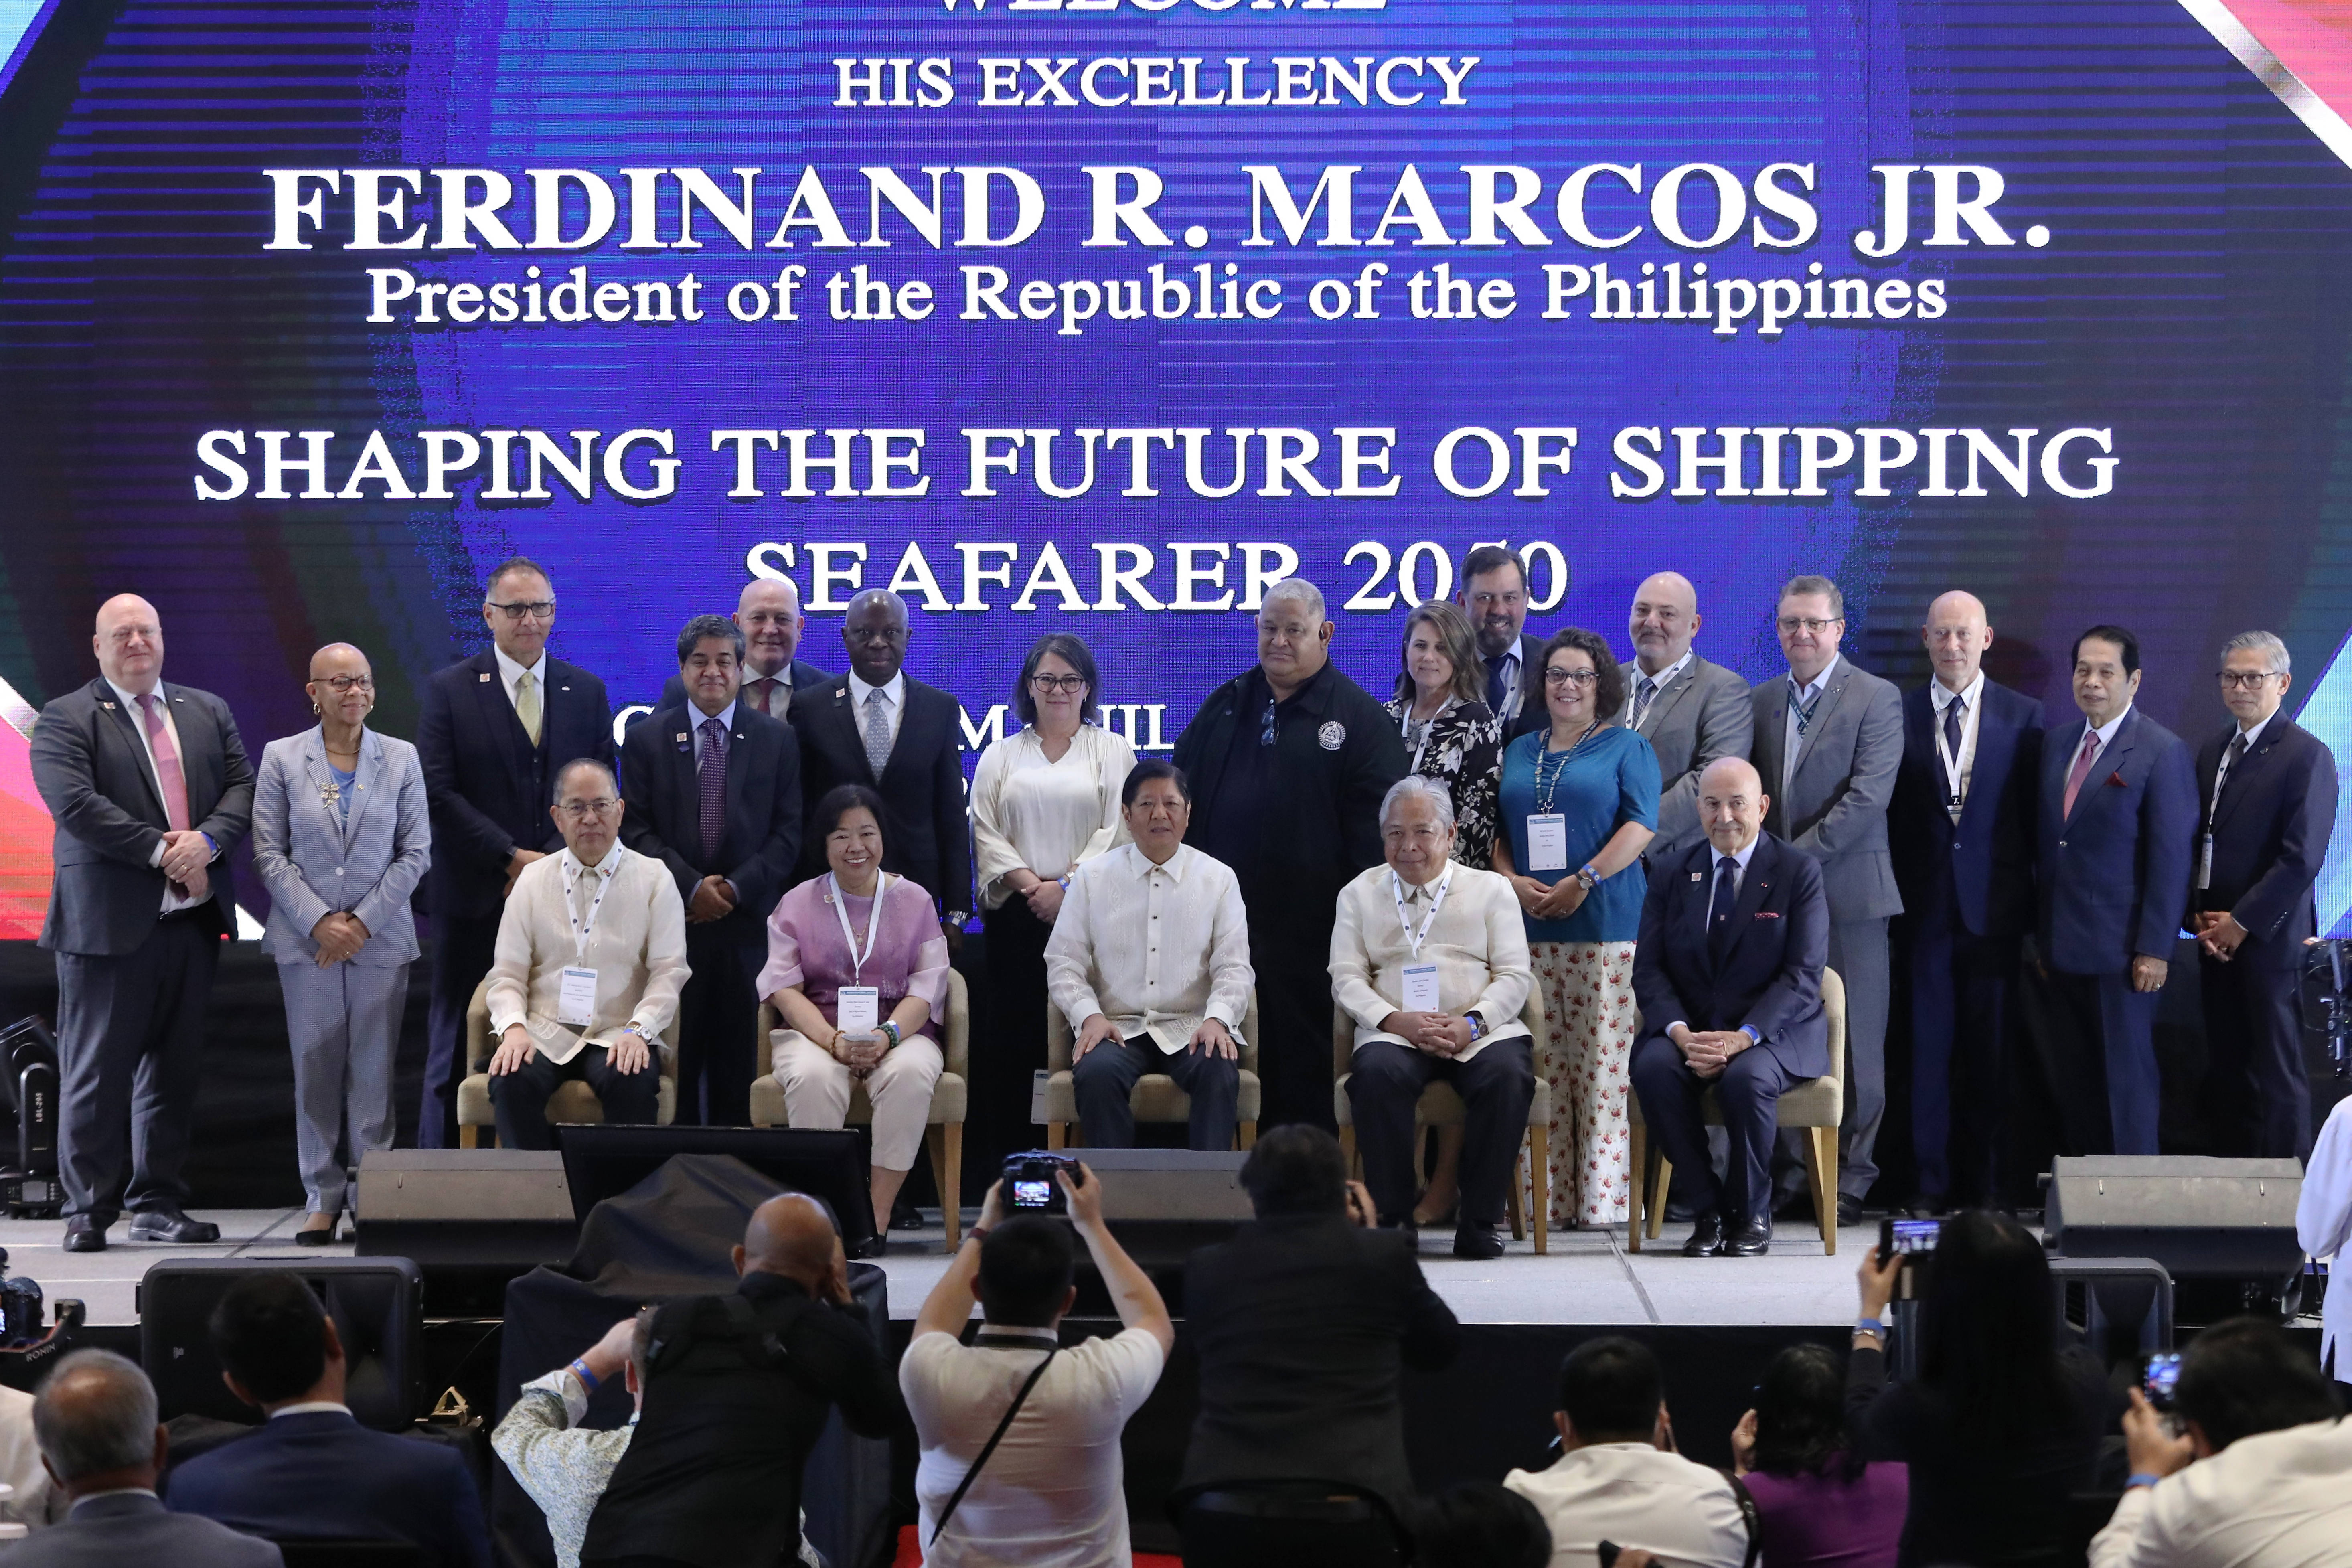 Shaping the Future of Shipping -- Seafarer 2050 Summit